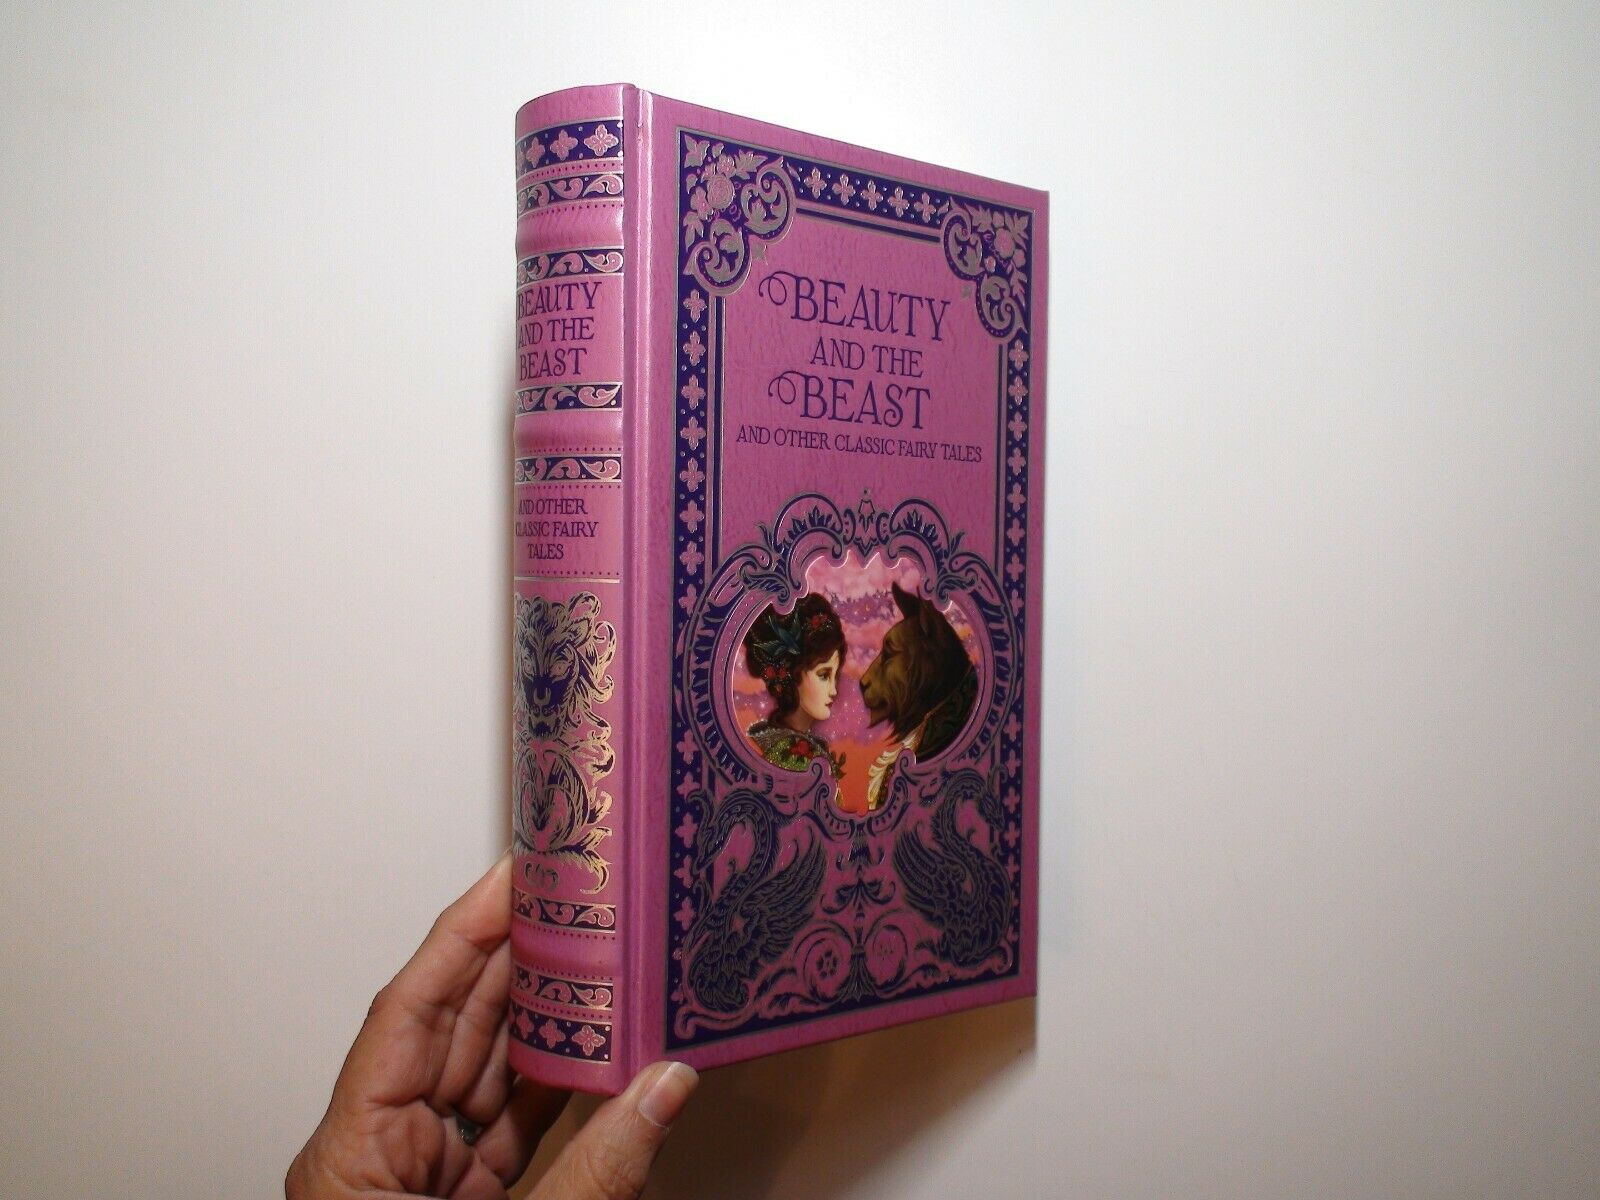 Beauty and the Beast and Other Classic Fairy Tales, 2016, Barnes & Noble Edition